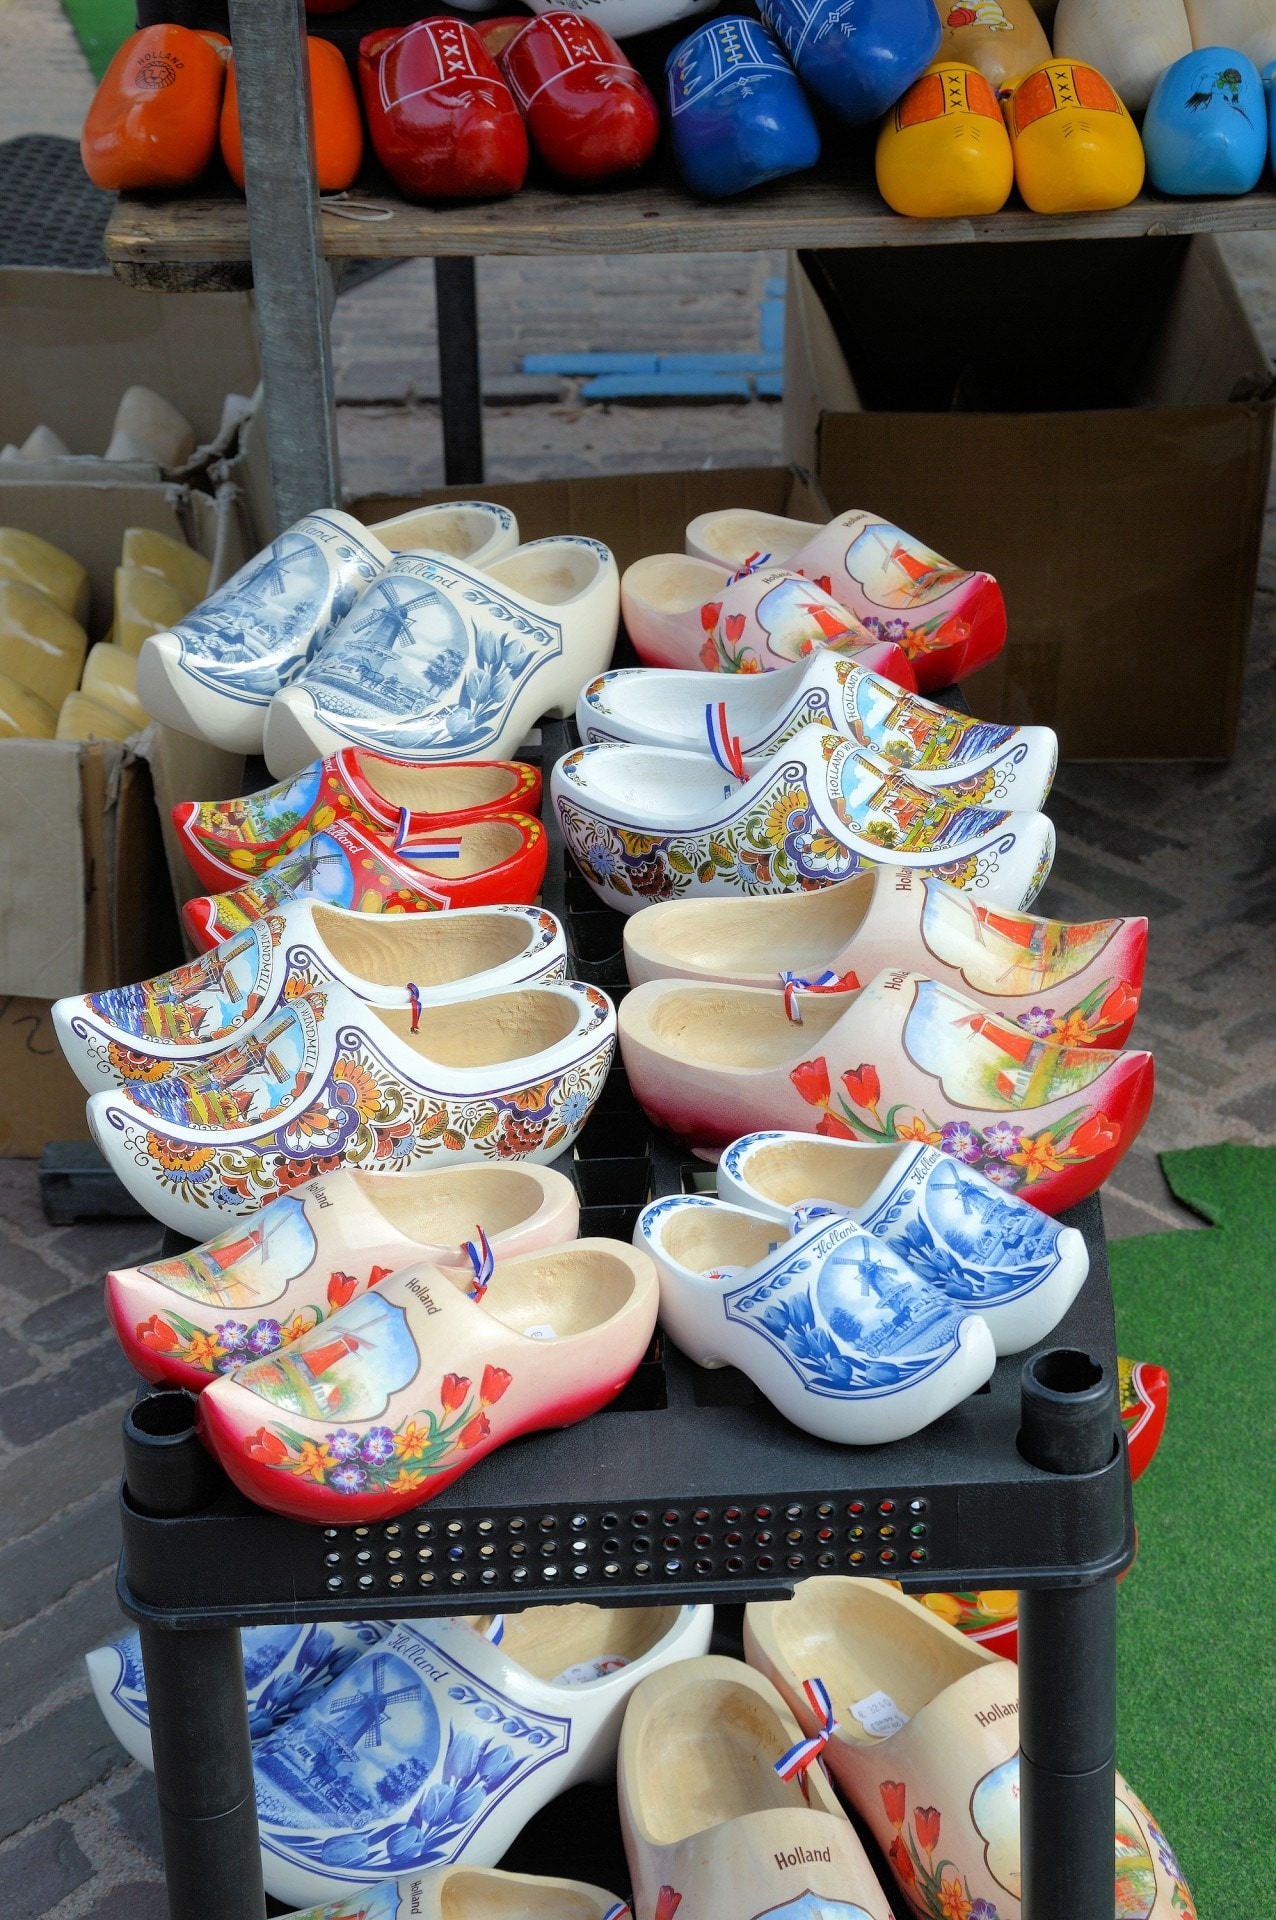 Tradition, Holland, Tourism, Clogs, large group of objects, choice